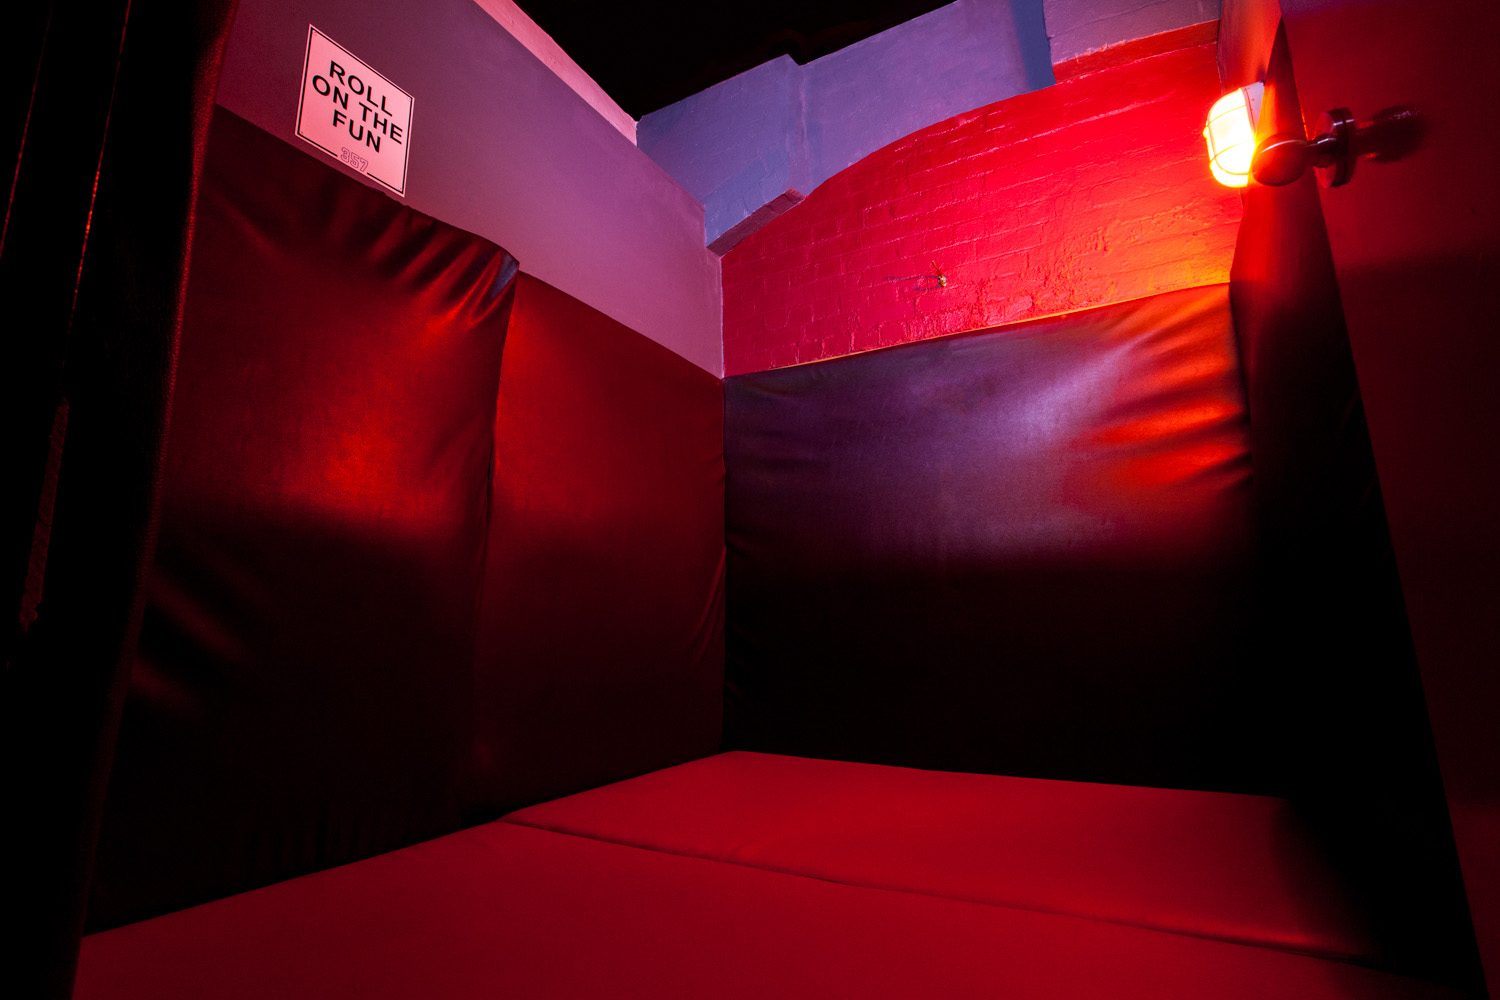 Wrestling room, padded floor and walls. This is our rough play area. With free condoms in every room so you can play safe at all times.